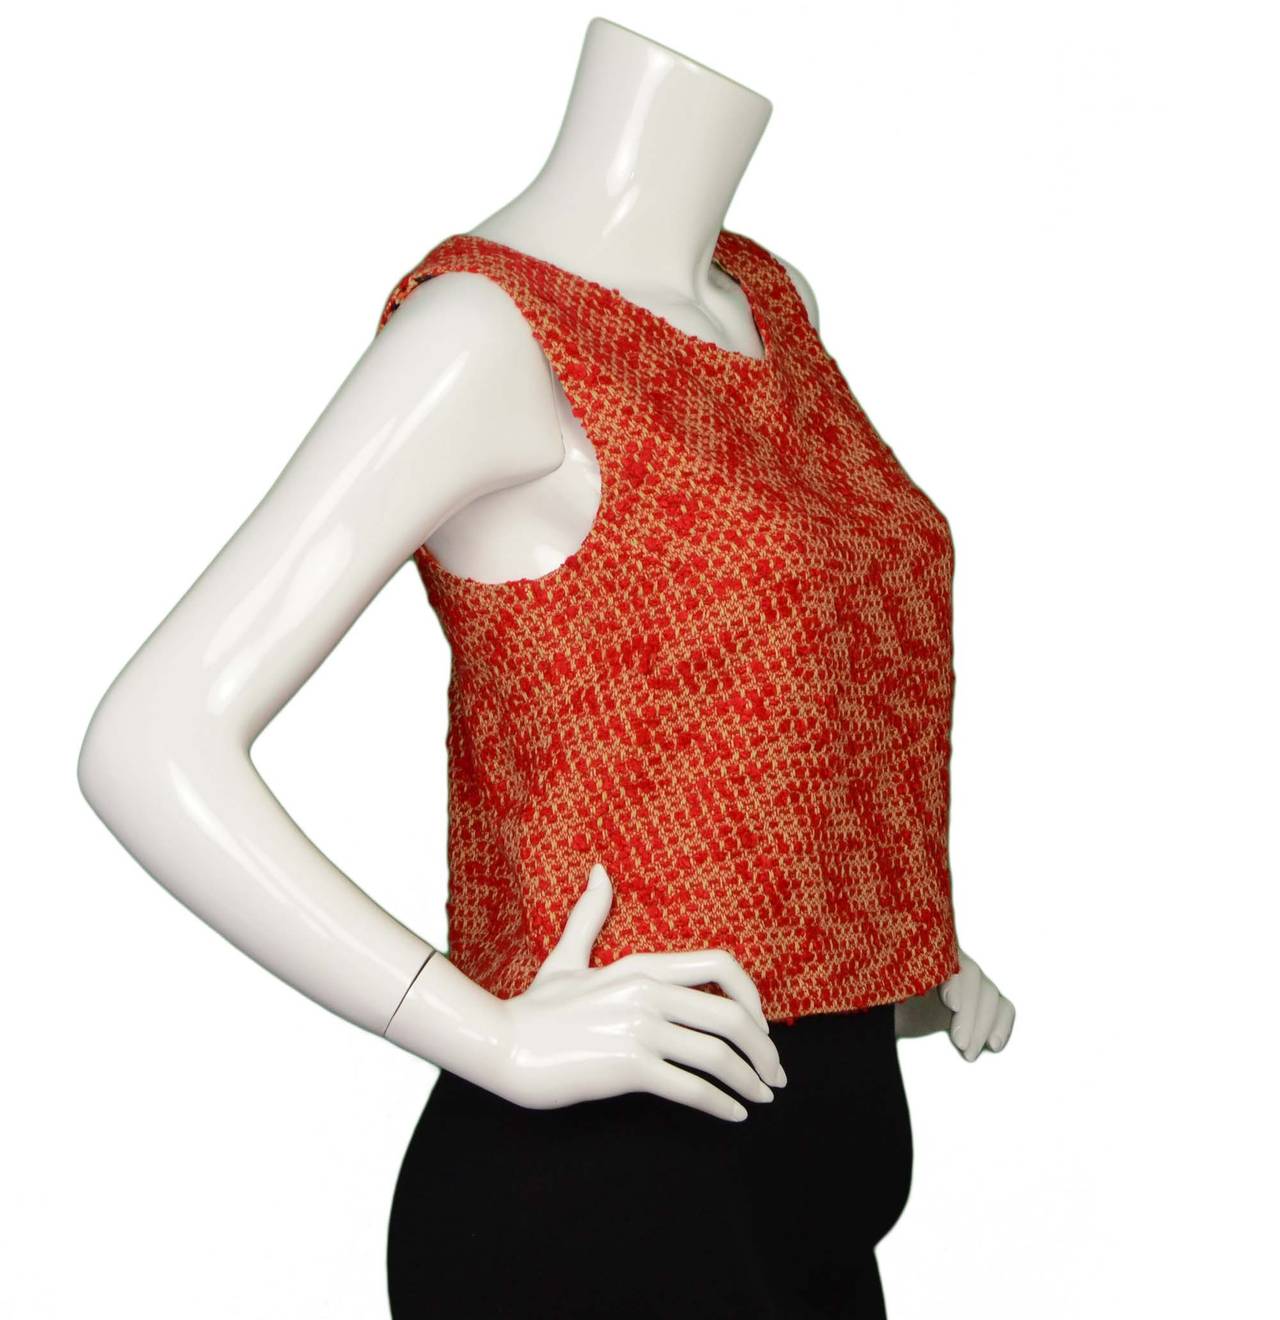 Chanel Vintage '99 Red & Tan Tweed Shell Top 
Made in: France
Year of Production: 1999
Color: Red and tan
Composition: 95% polyester, 5% acrylic
Lining: Multi-colored dot print, 100% silk
Closure/opening: Pull on
Exterior Pockets: